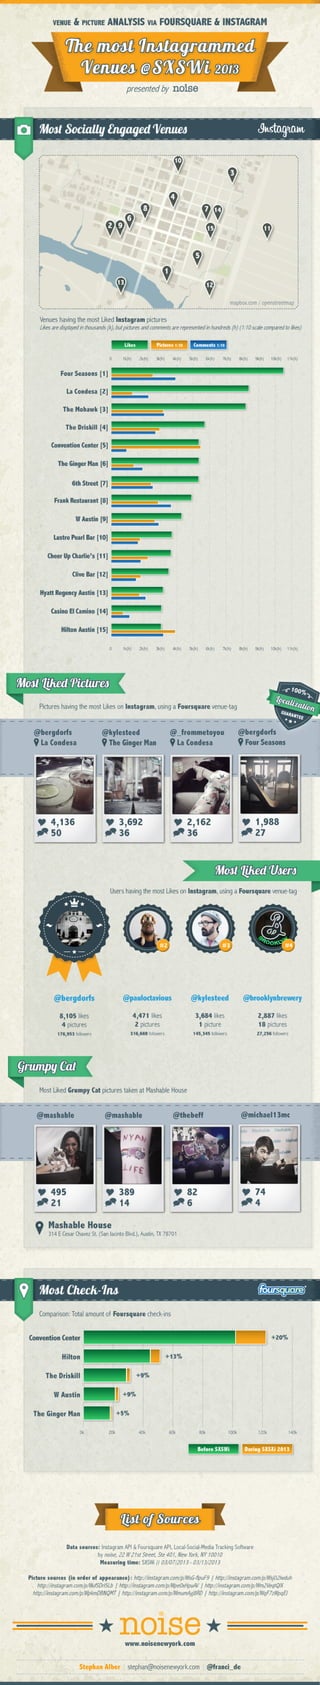 Sxs wi instagram-foursquare-infographic-map-flat